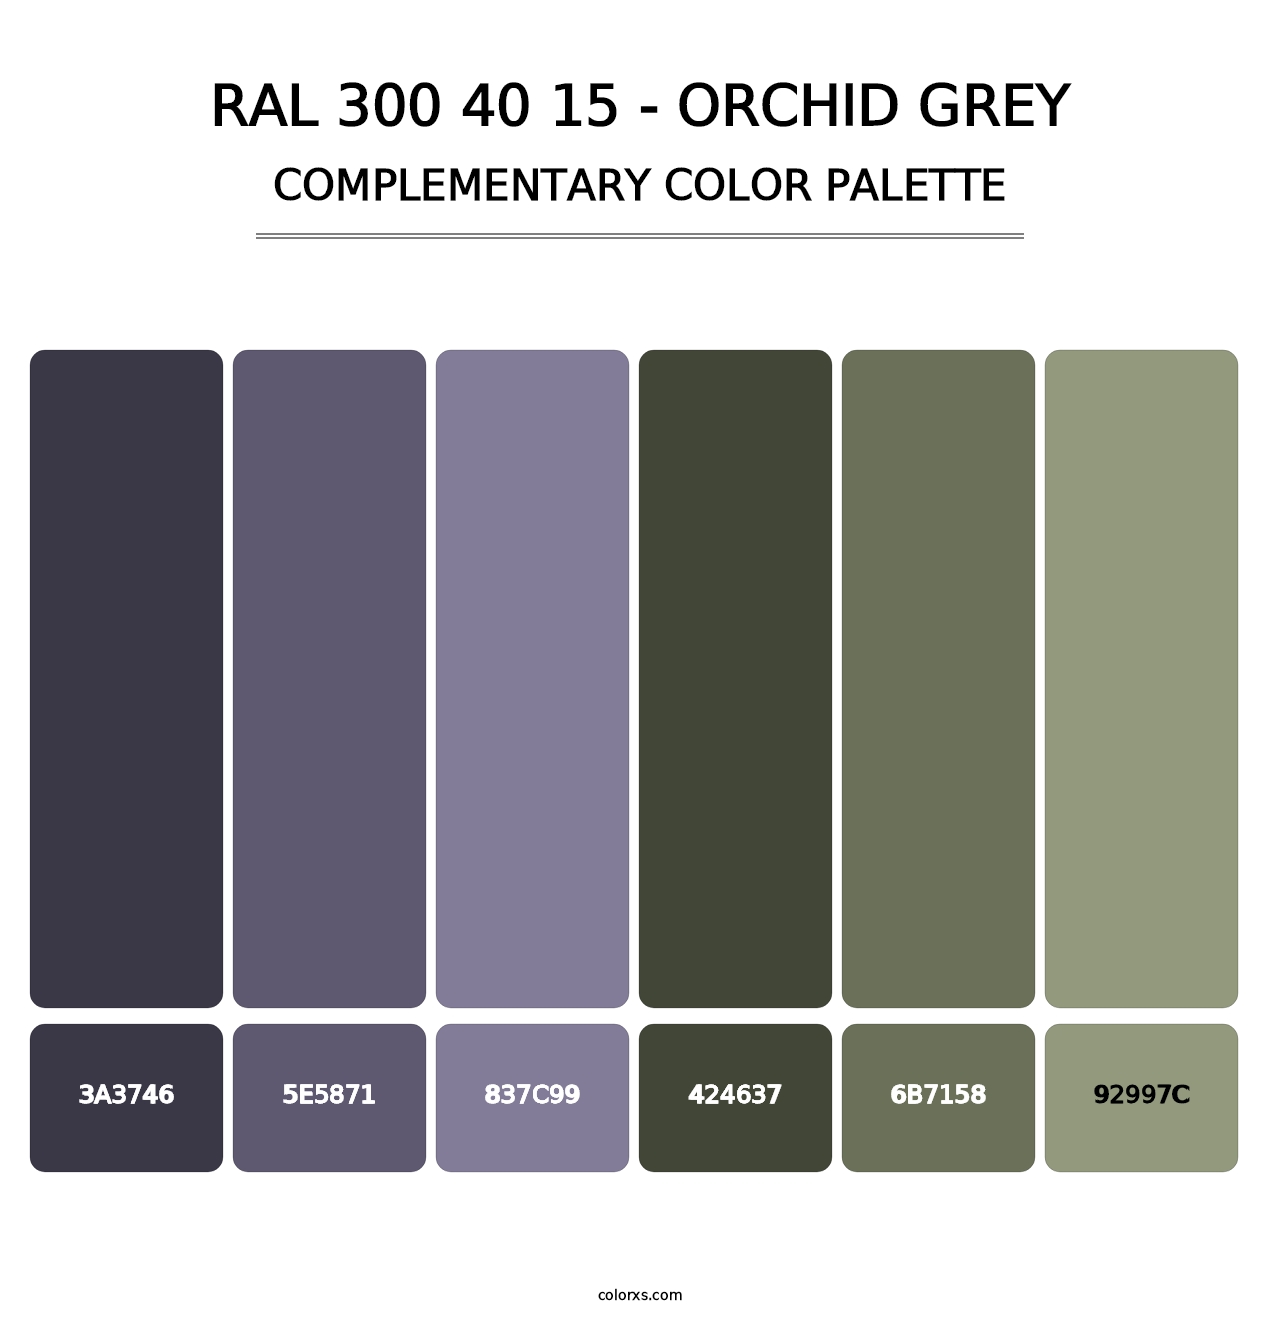 RAL 300 40 15 - Orchid Grey - Complementary Color Palette